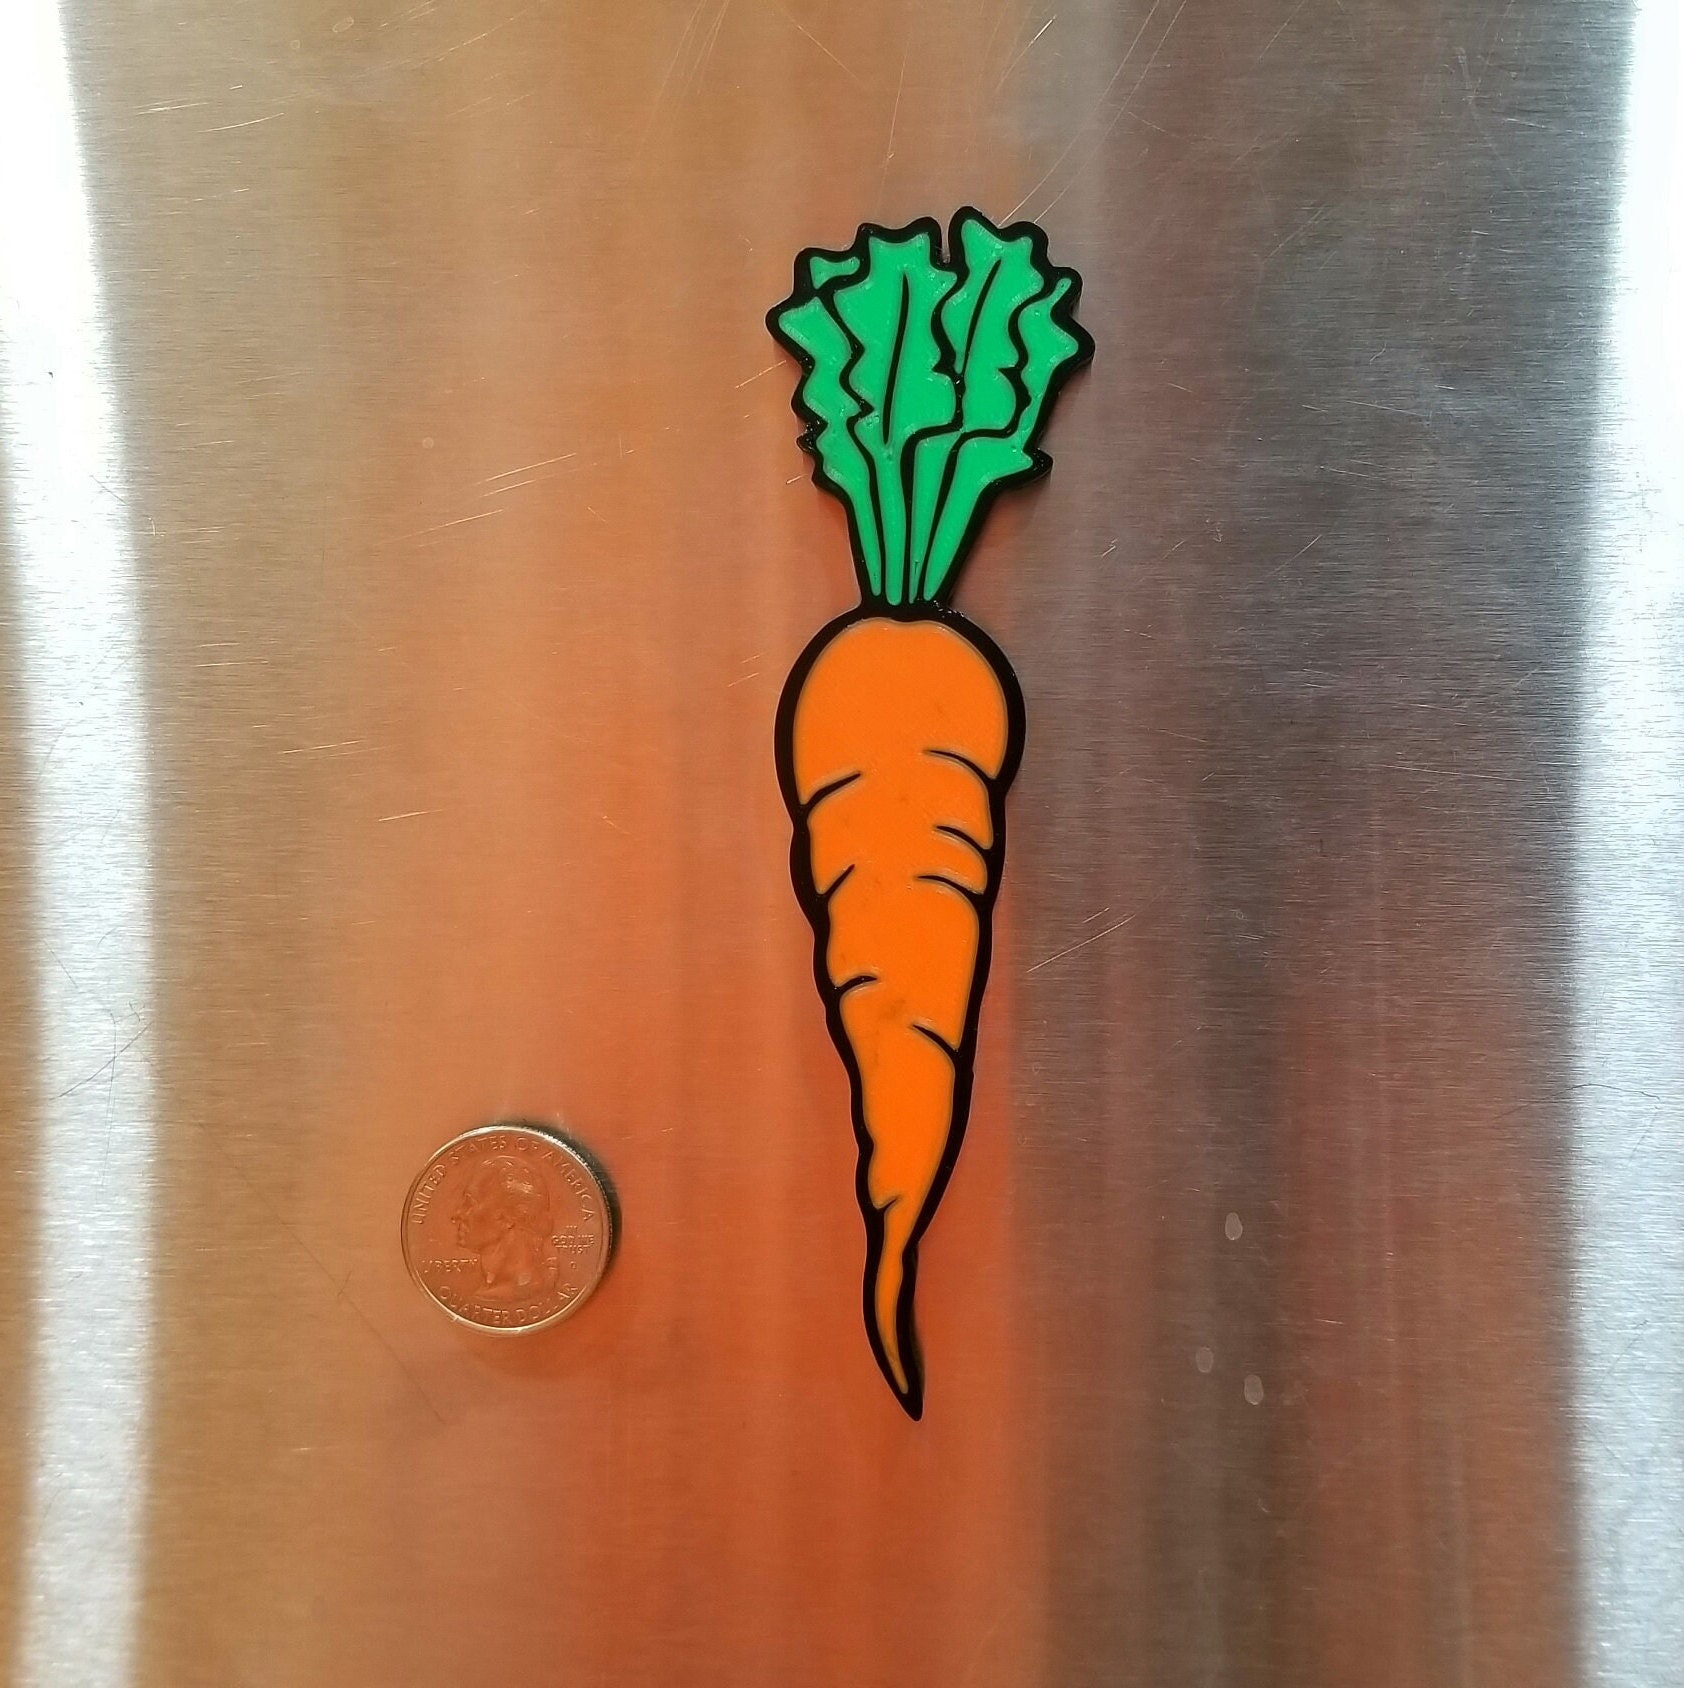 How to Make a Felt Carrot Pin - My Eclectic Treasures